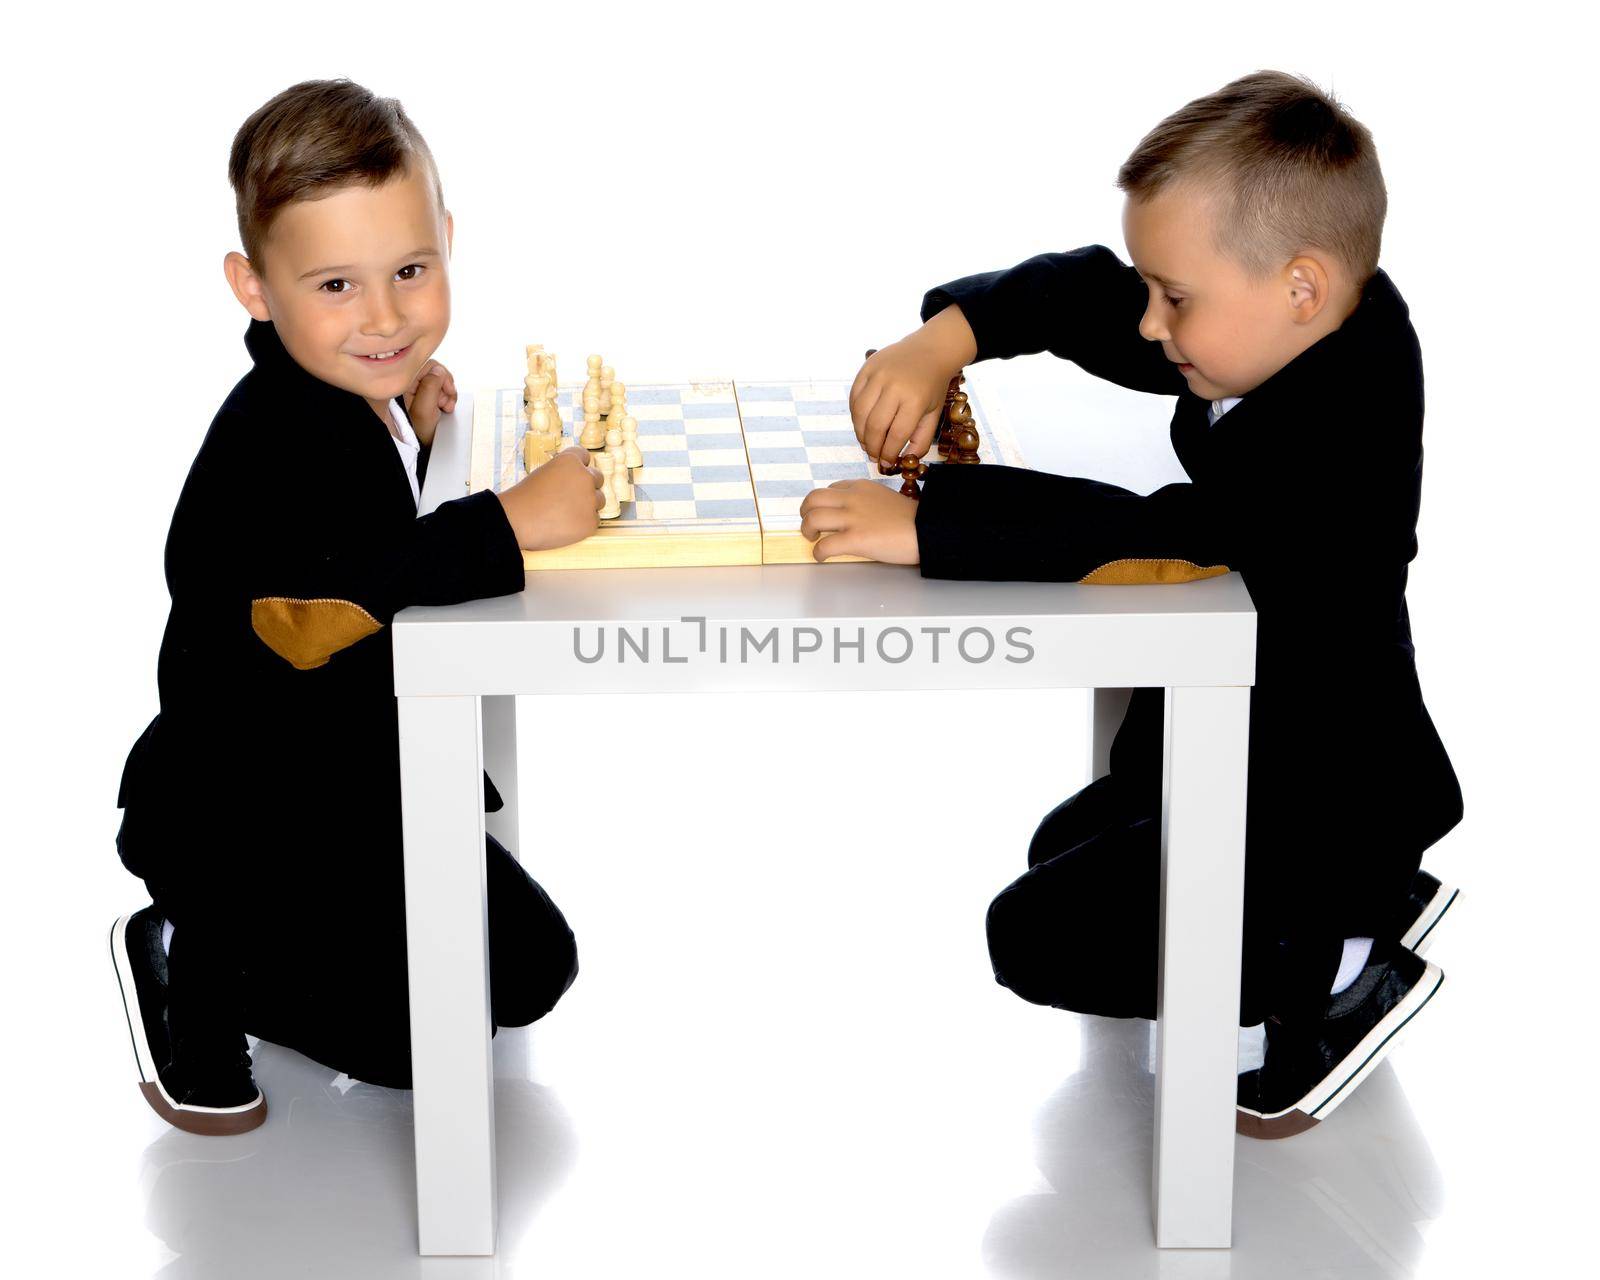 Two brothers are playing chess at home. Game, education, lifestyle concept.Isolated on white background